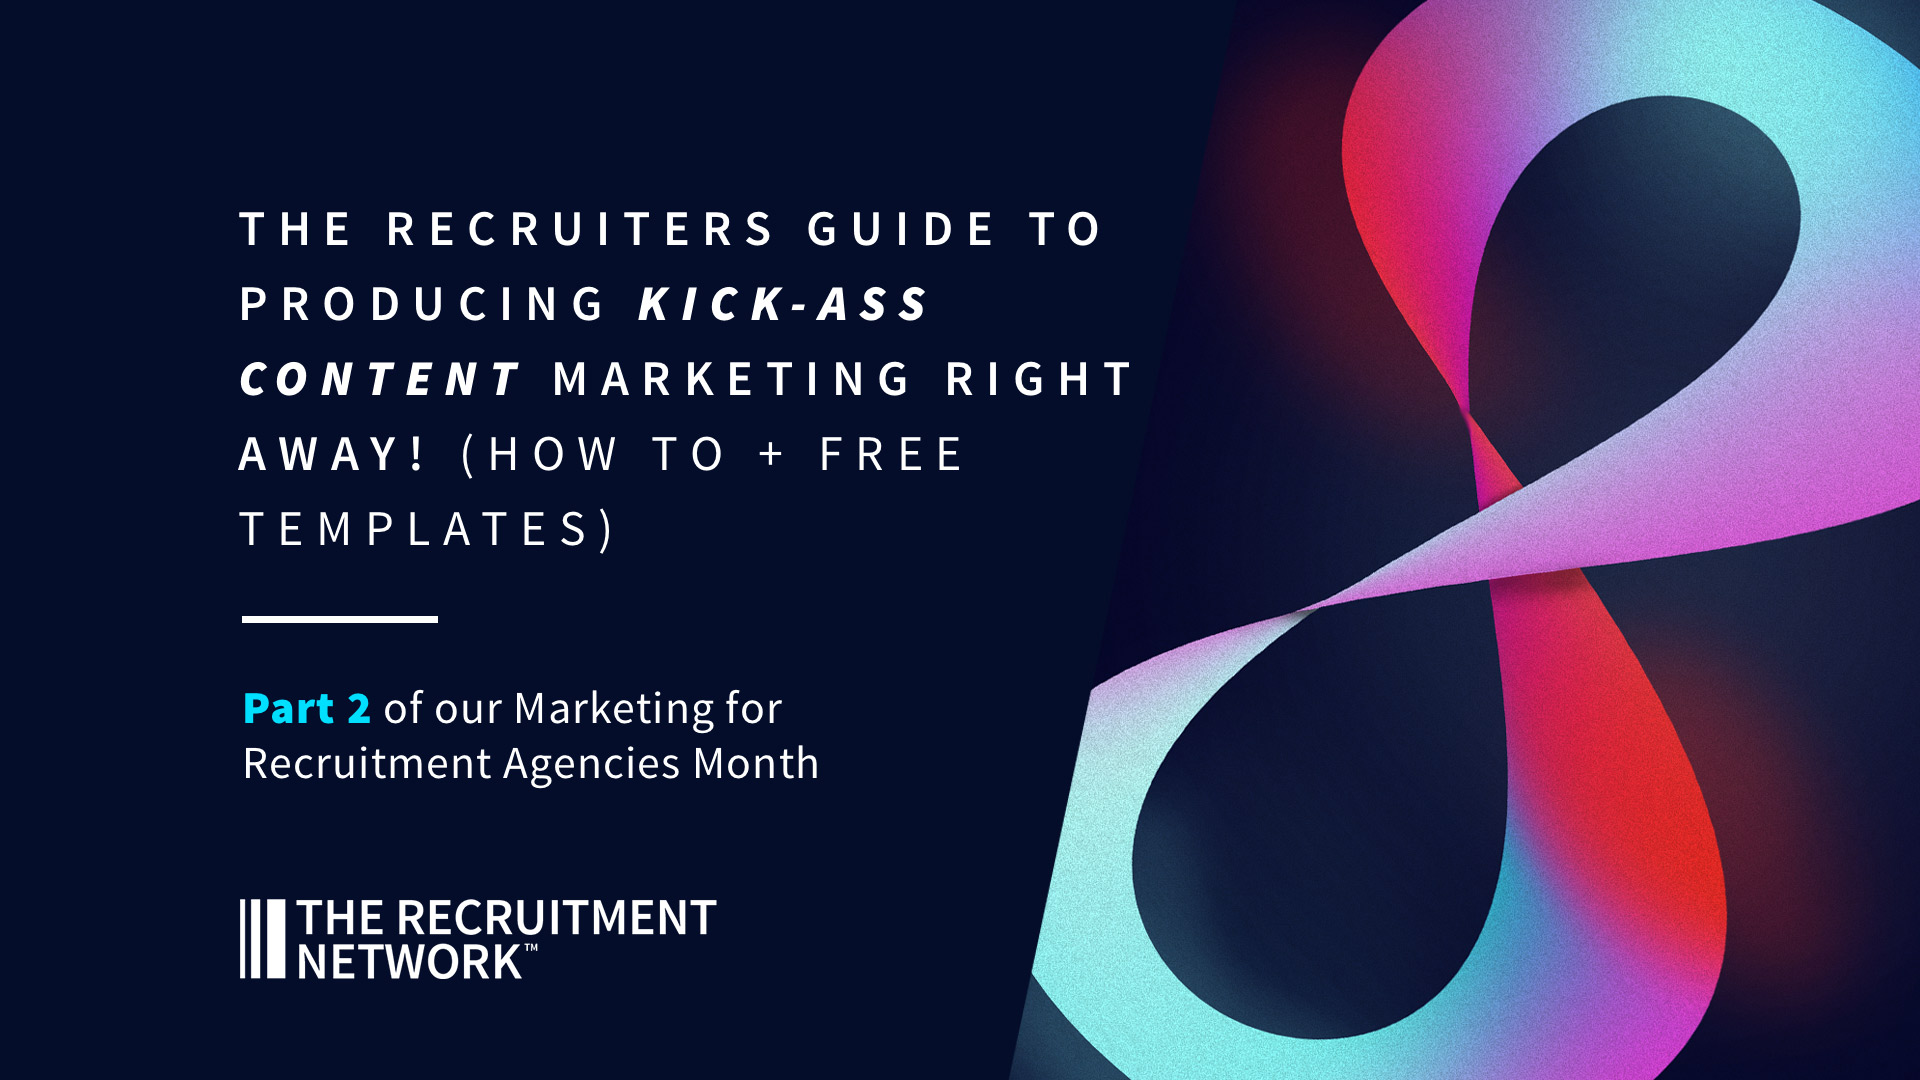 The Recruiters Guide to Producing Kick-ass Content Marketing right away! (How to + free templates)